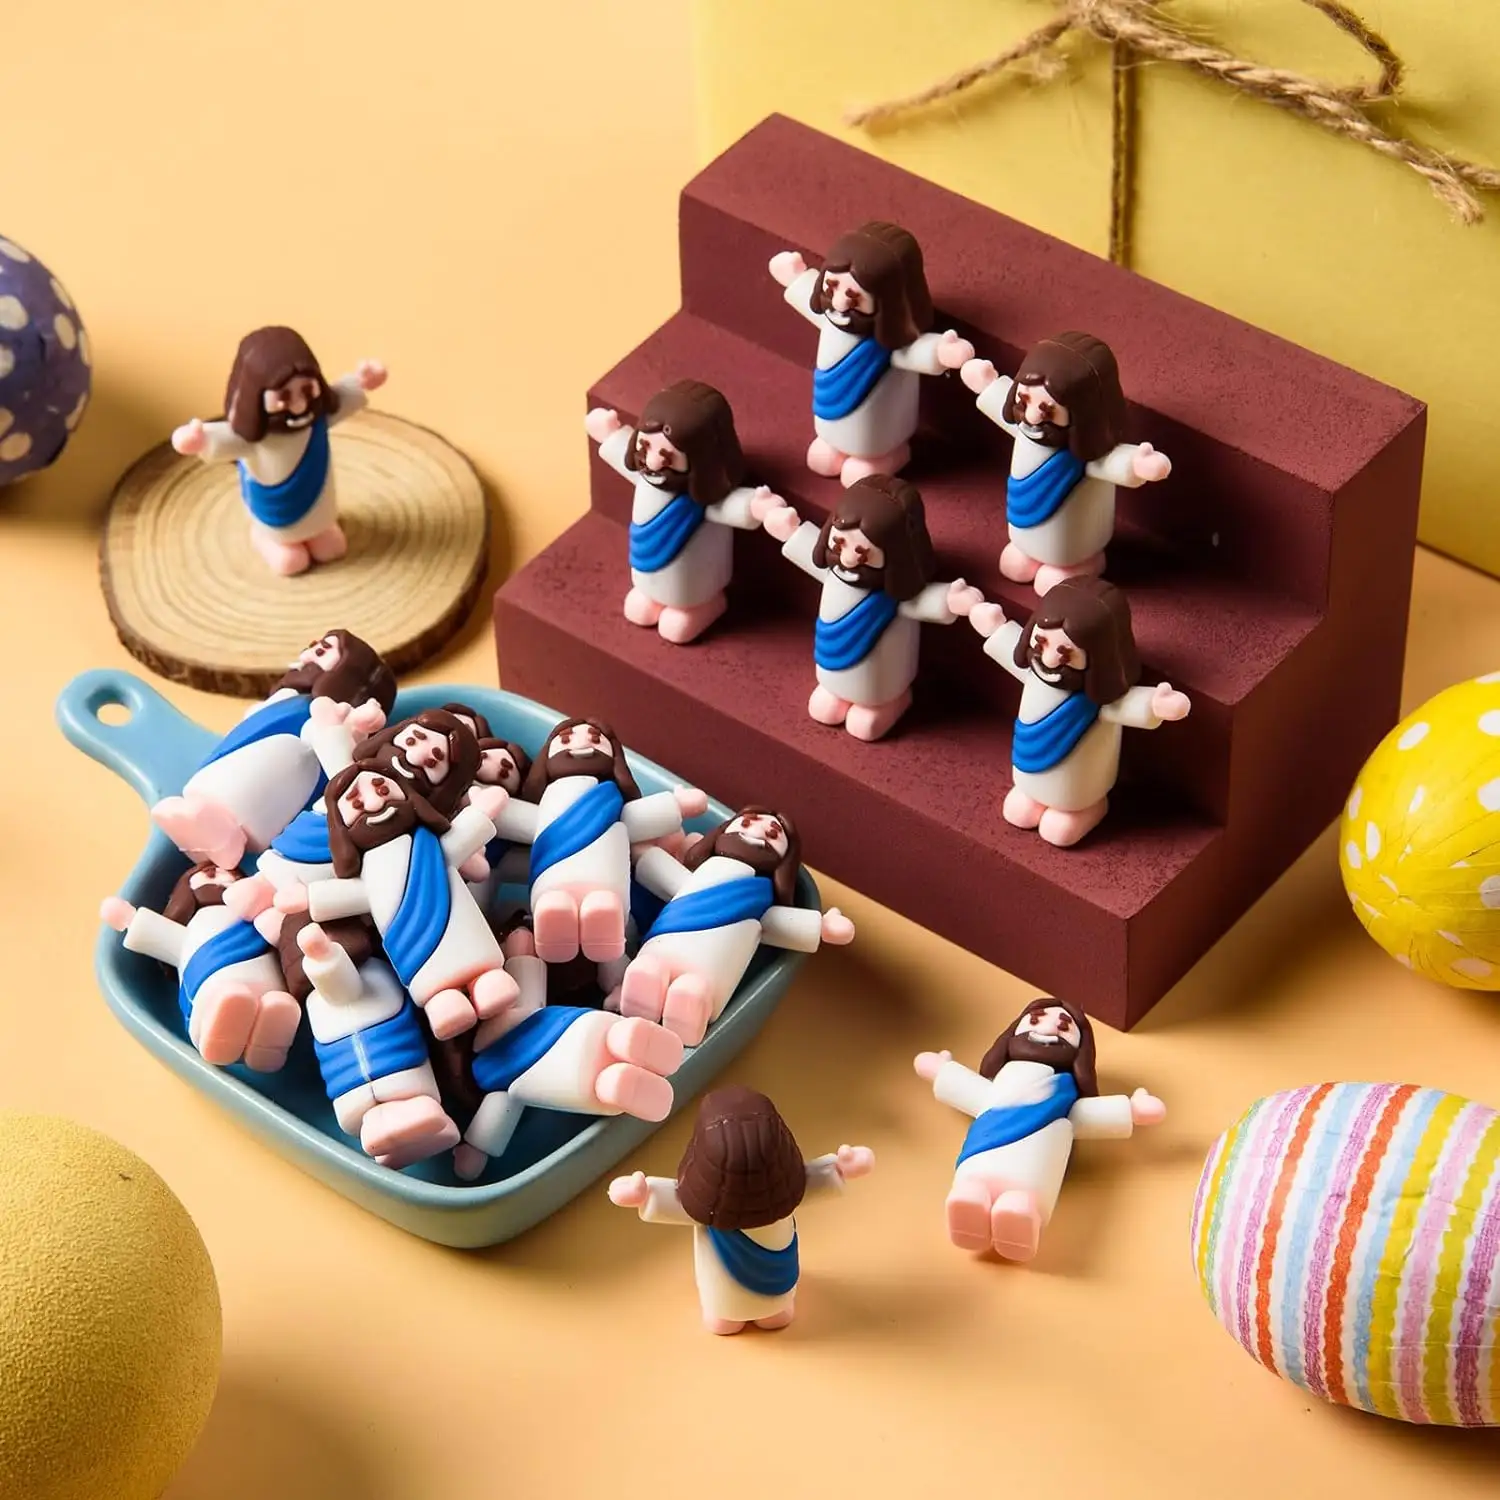 Mini Jesus Figurines Easter Decorations Figurines Party Favors Gift For Filled Easter Eggs Stuffers TLX0119